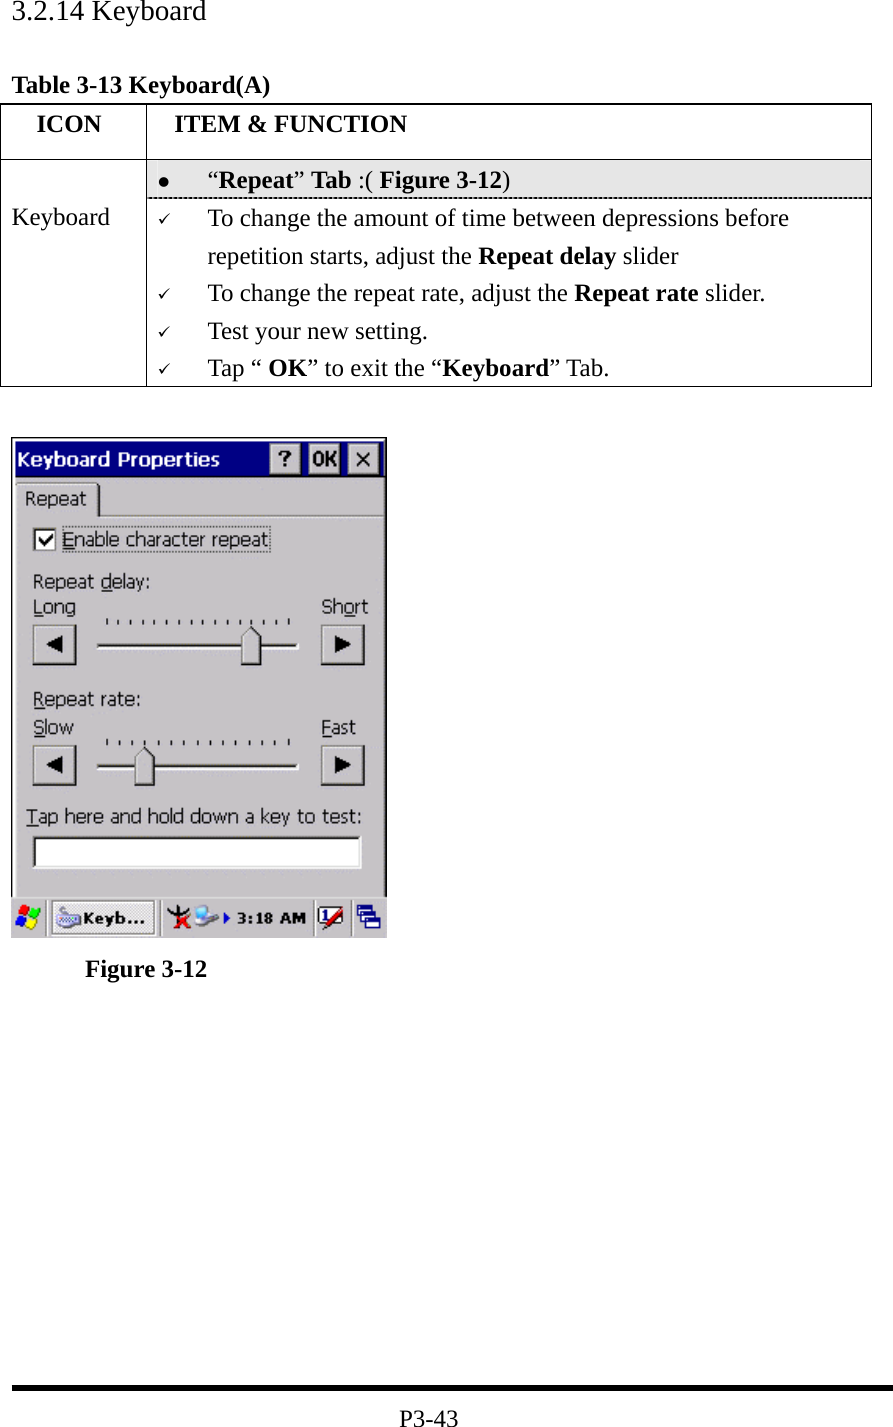 3.2.14 Keyboard  Table 3-13 Keyboard(A)   ICON   ITEM &amp; FUNCTION   “Repeat” Tab :( Figure 3-12)    Keyboard    To change the amount of time between depressions before repetition starts, adjust the Repeat delay slider   To change the repeat rate, adjust the Repeat rate slider.   Test your new setting.   Tap “ OK” to exit the “Keyboard” Tab.    Figure 3-12            P3-43 